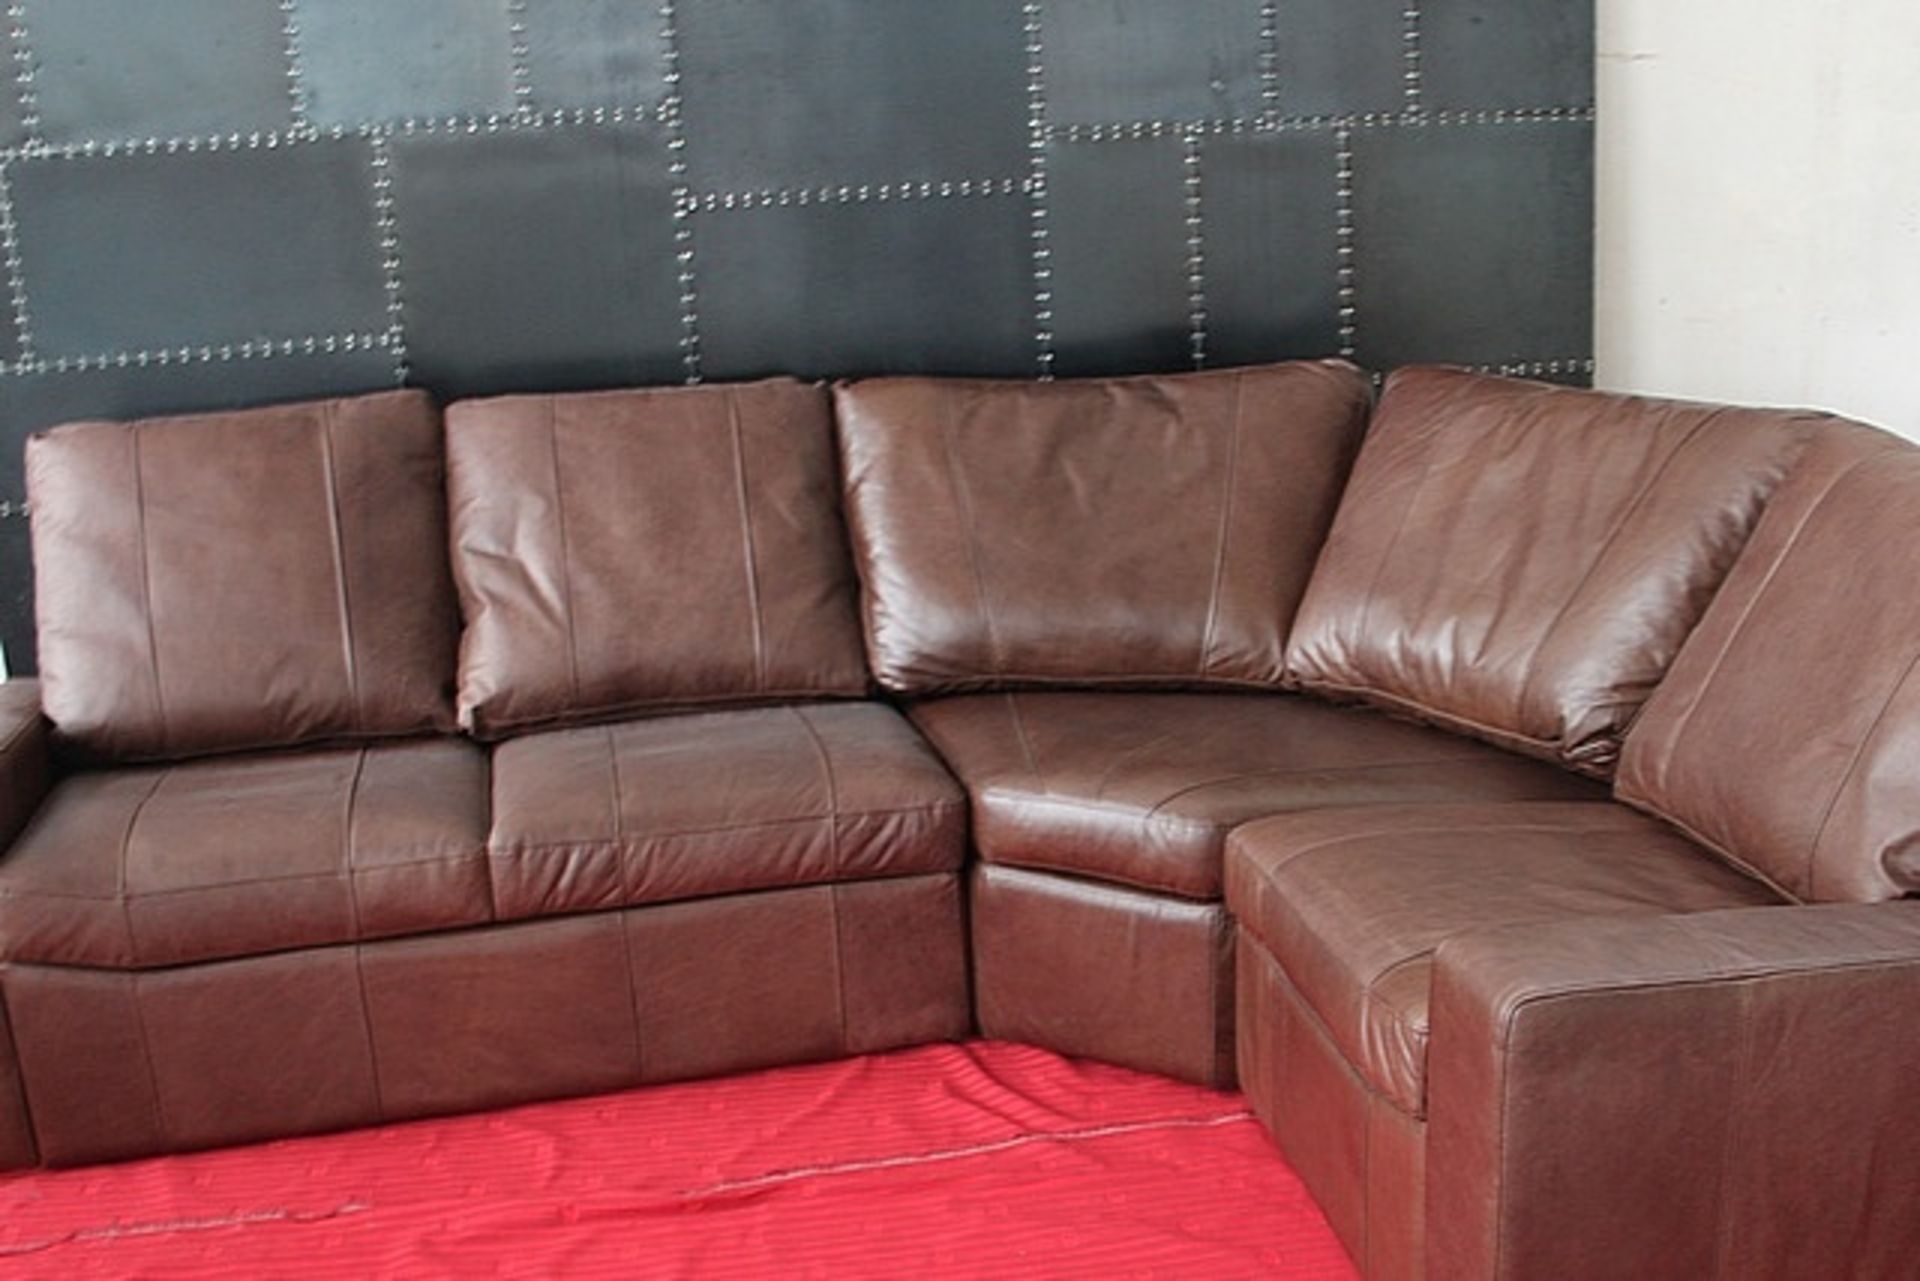 Crosby Leather Sectional Suite Comprising Of Corner Nap.Choco 171x106x88cm RRP £ 2637, Sectional - Image 6 of 8